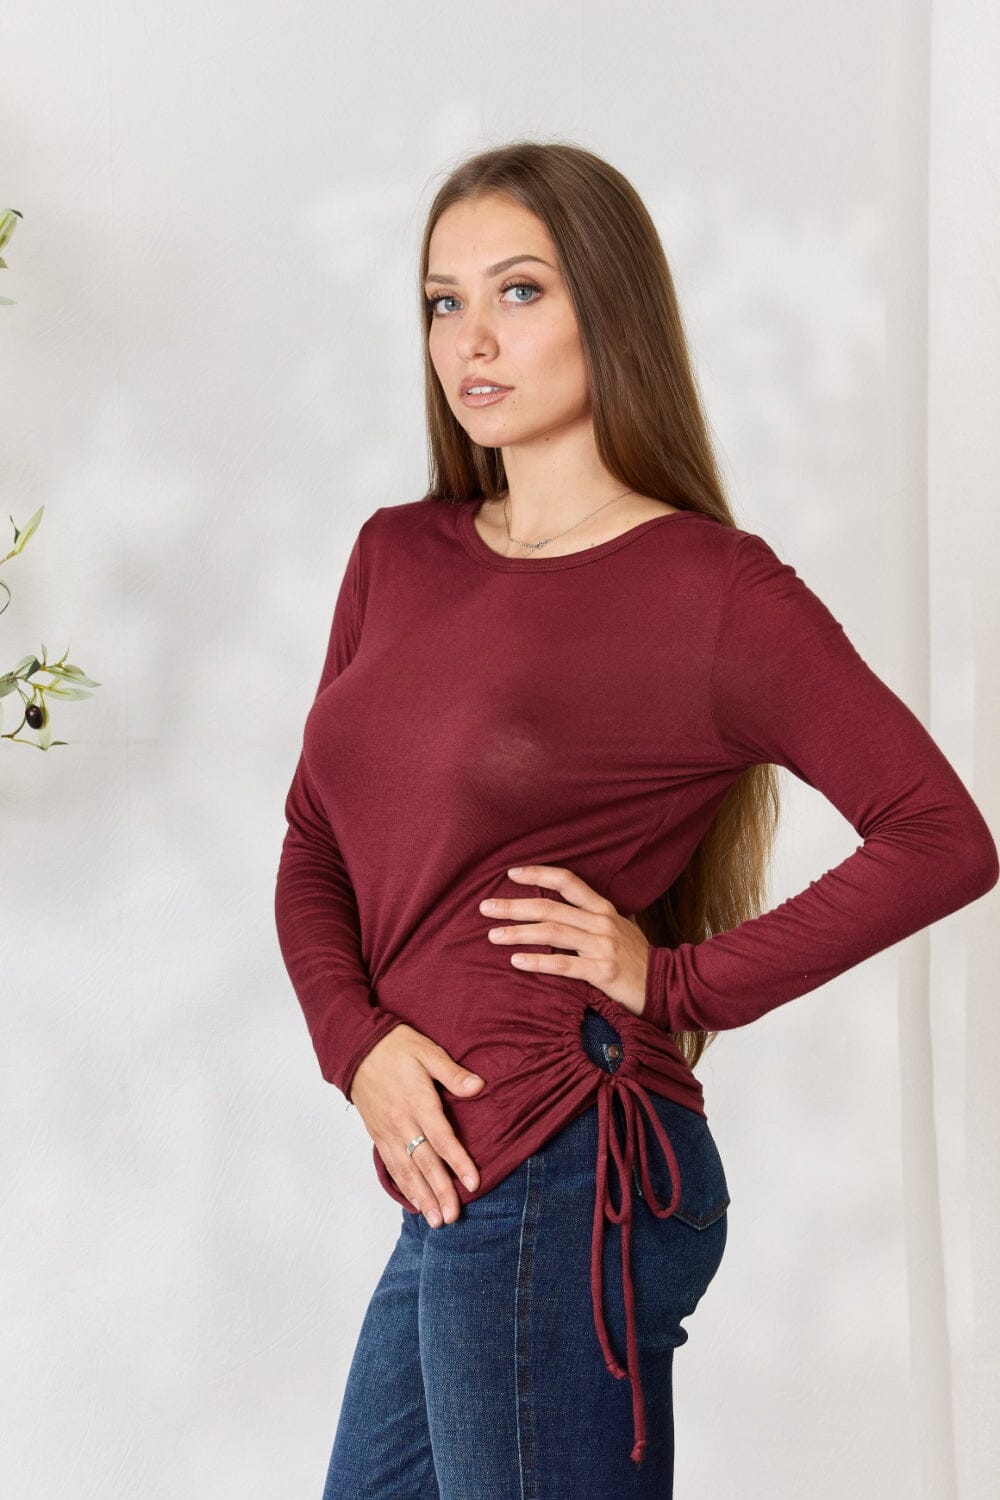 Culture Code Wine Red Drawstring Round Neck Long Sleeve Top Shirts & Tops jehouze 